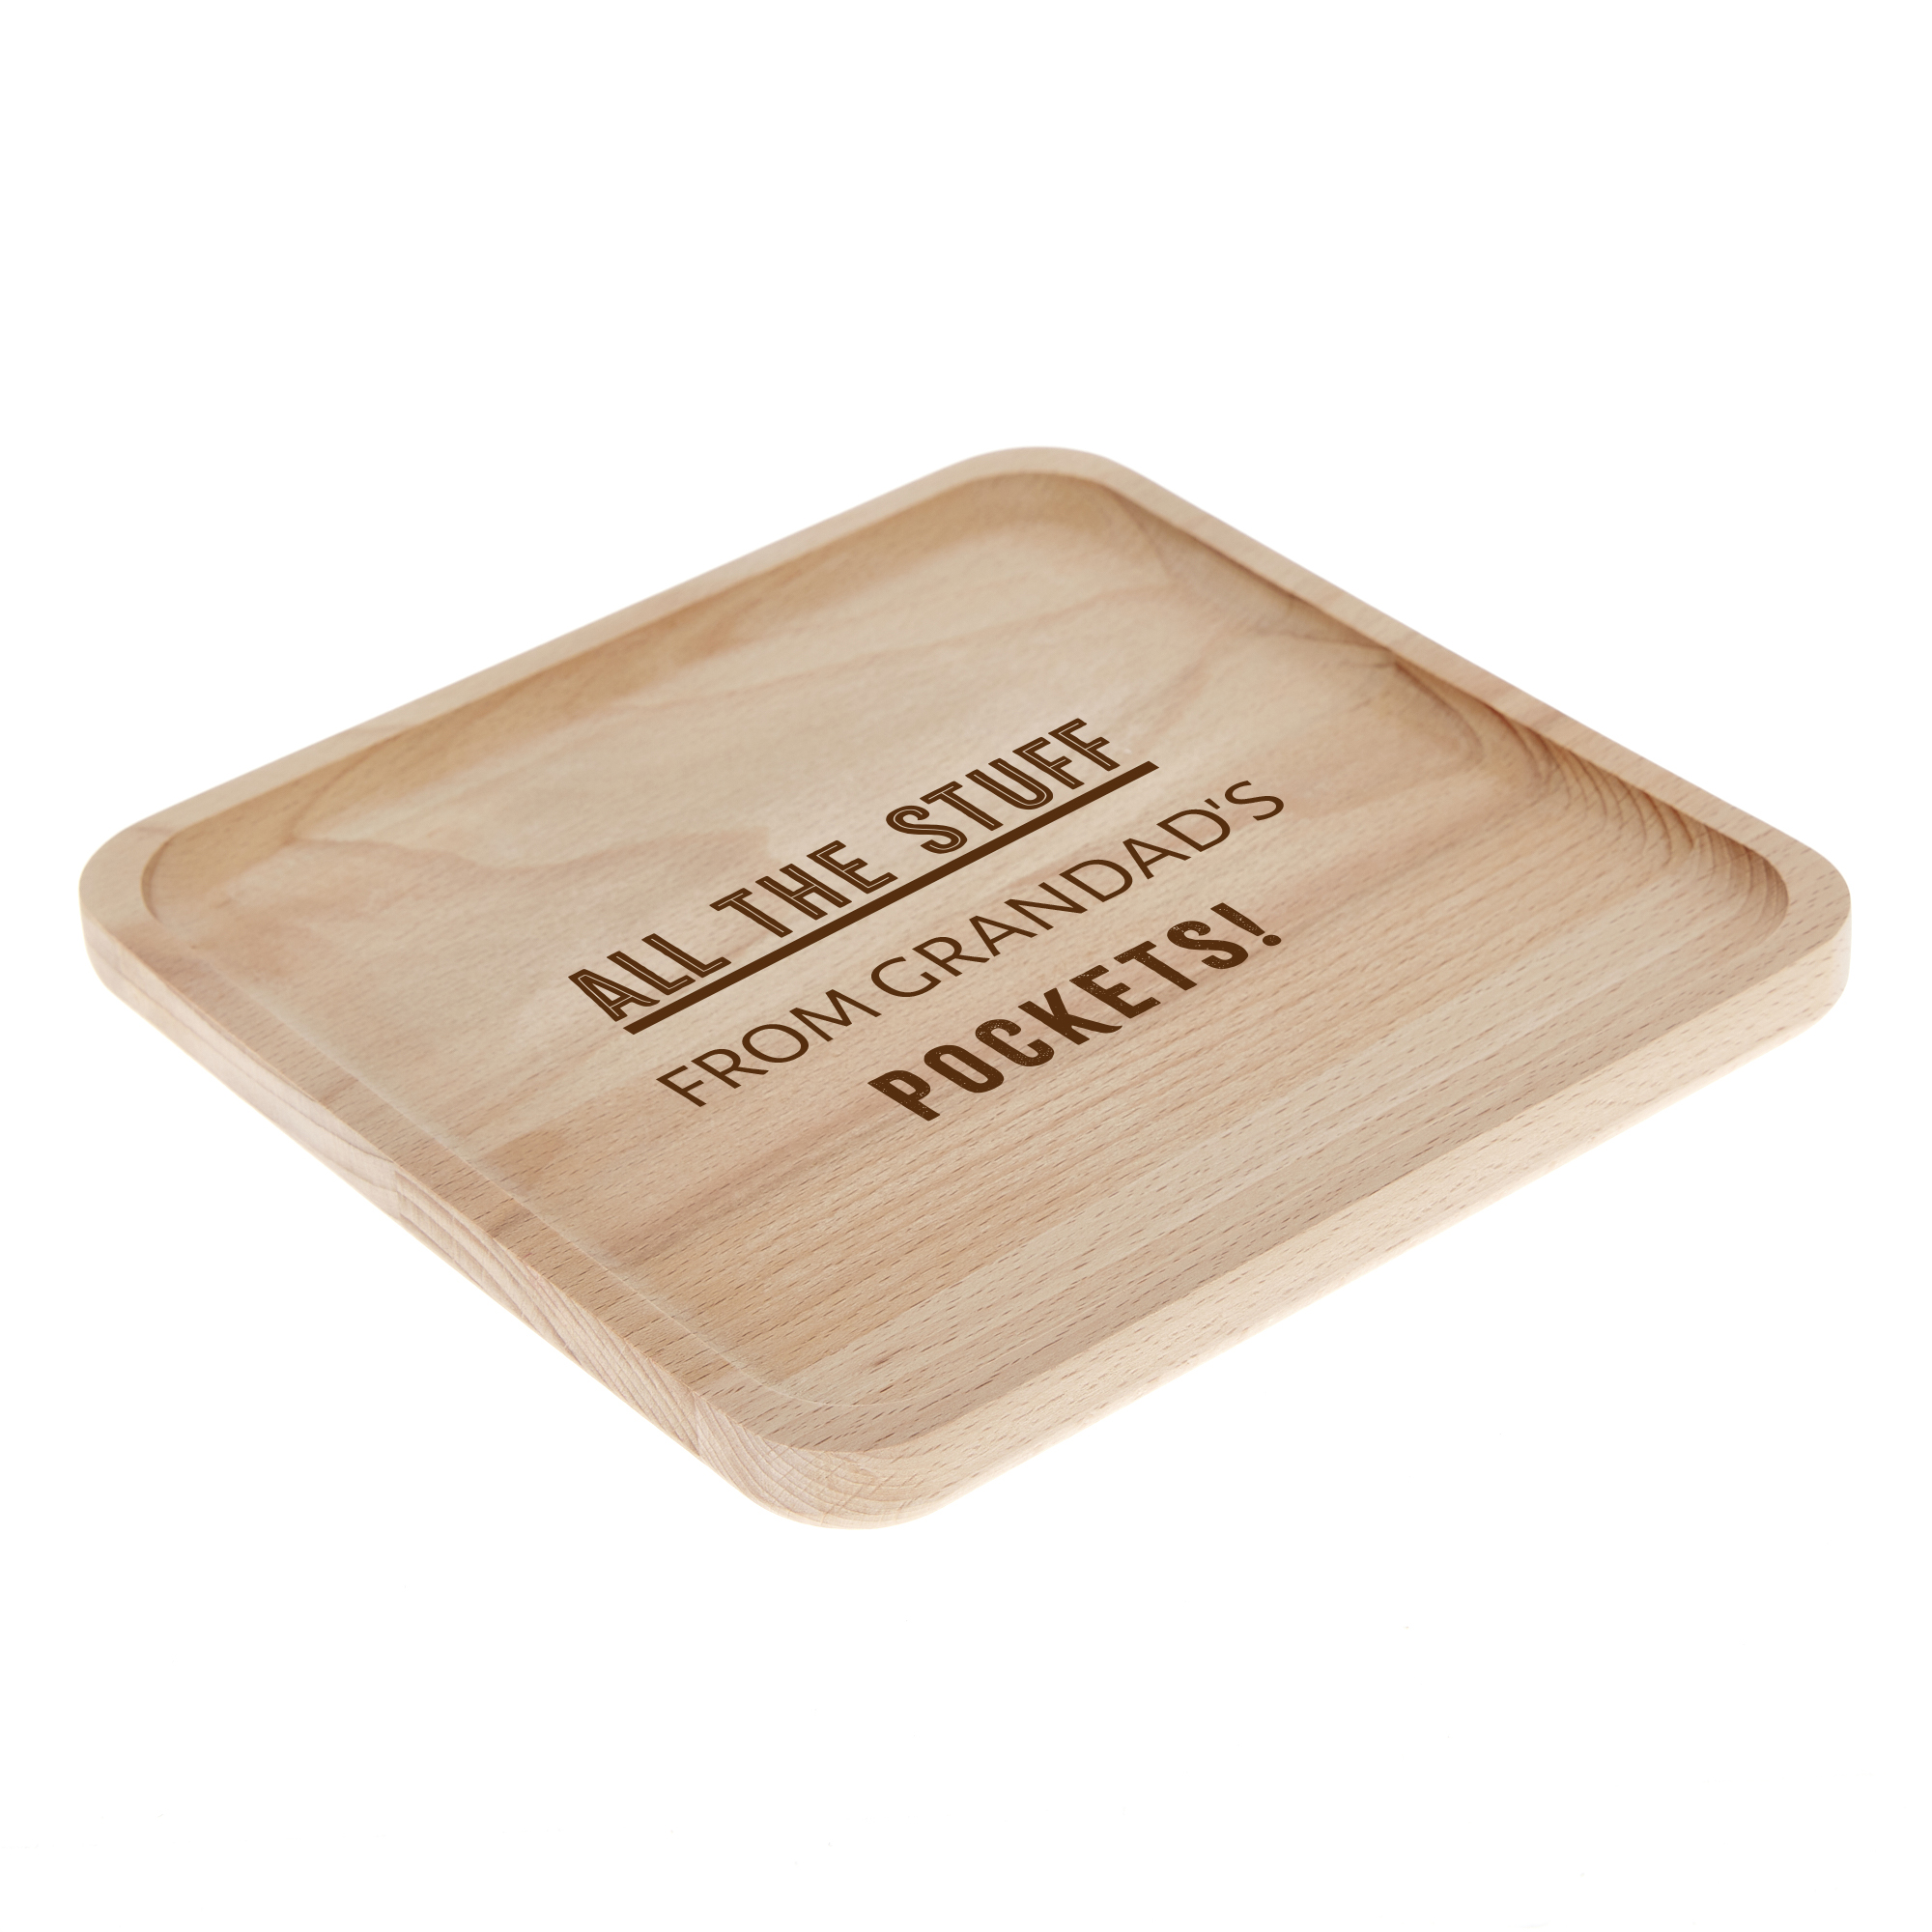 Personalised Wooden Shallow Square Tray - All the Stuff From Grandad's Pockets